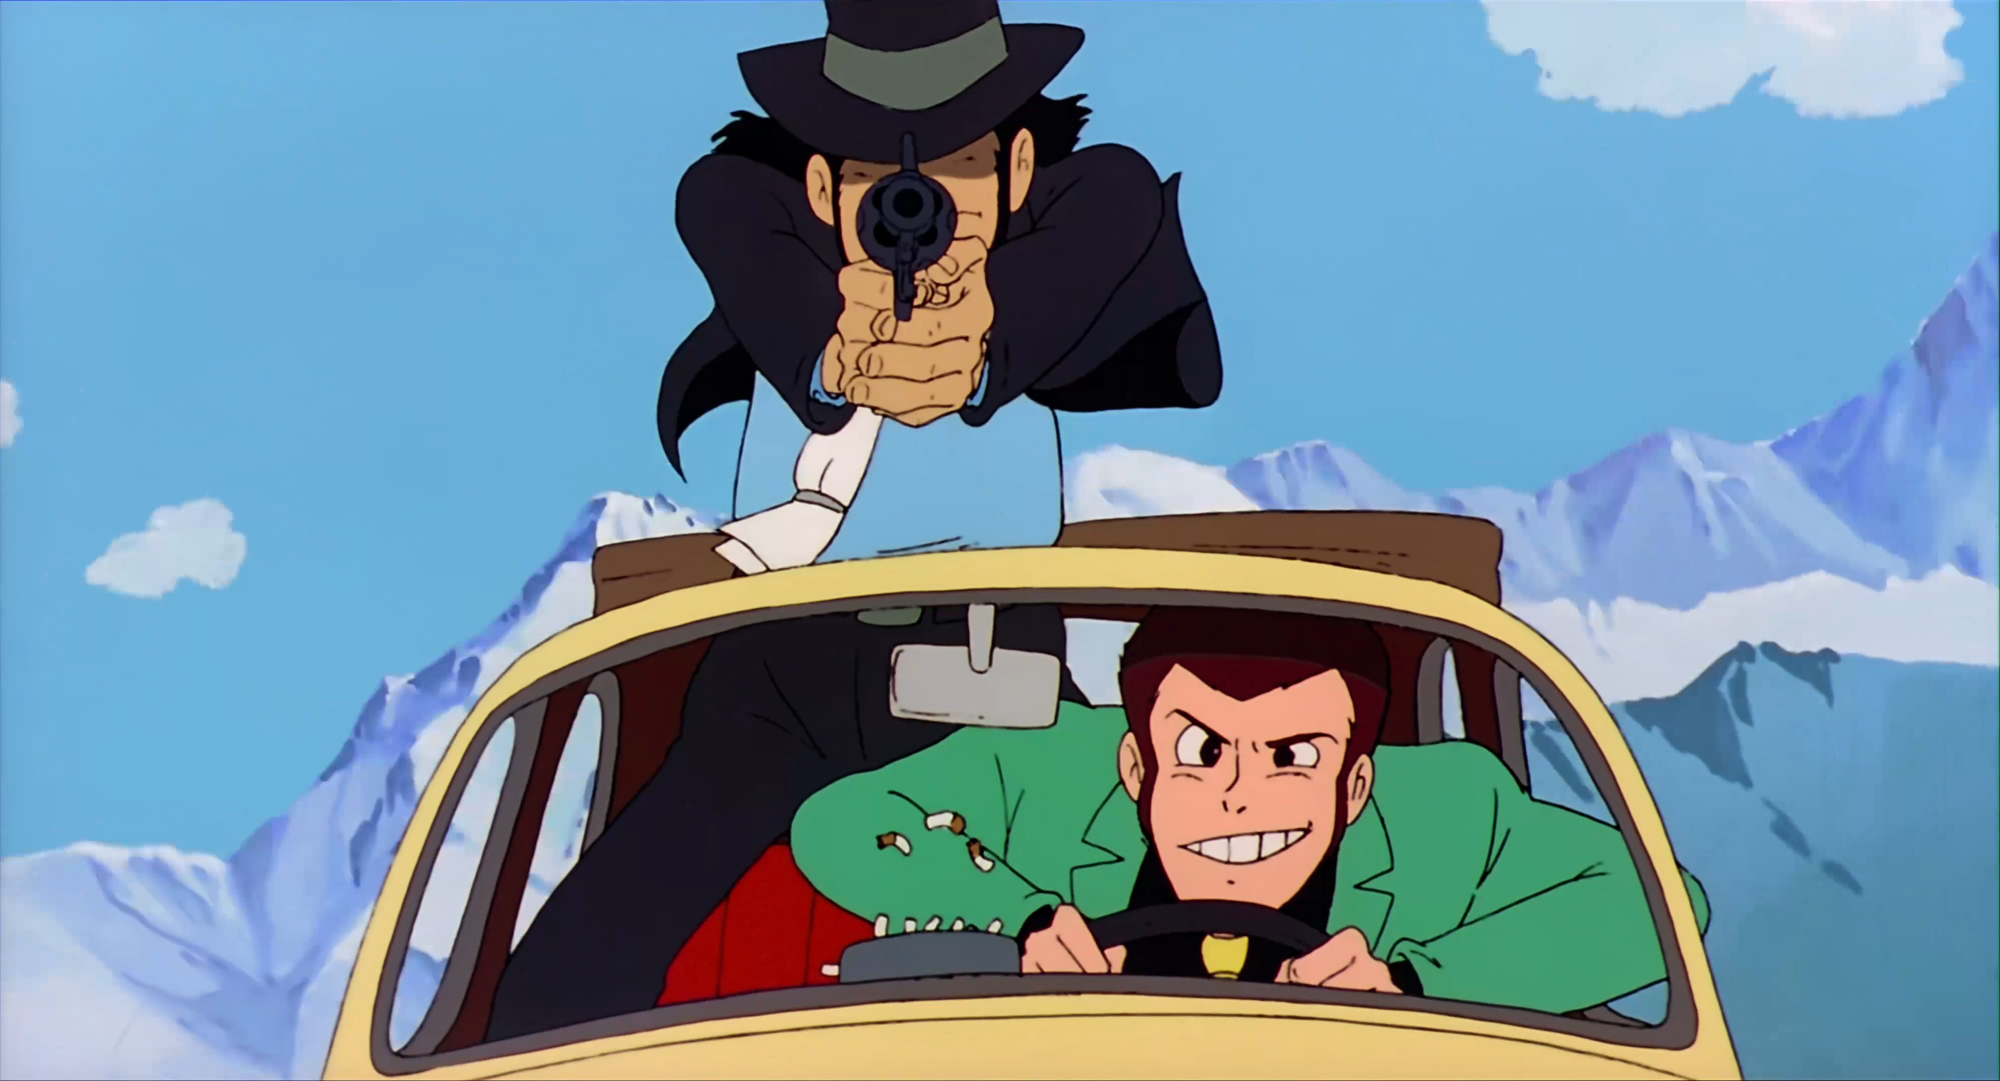 Lupin_Still_07.21.02.png